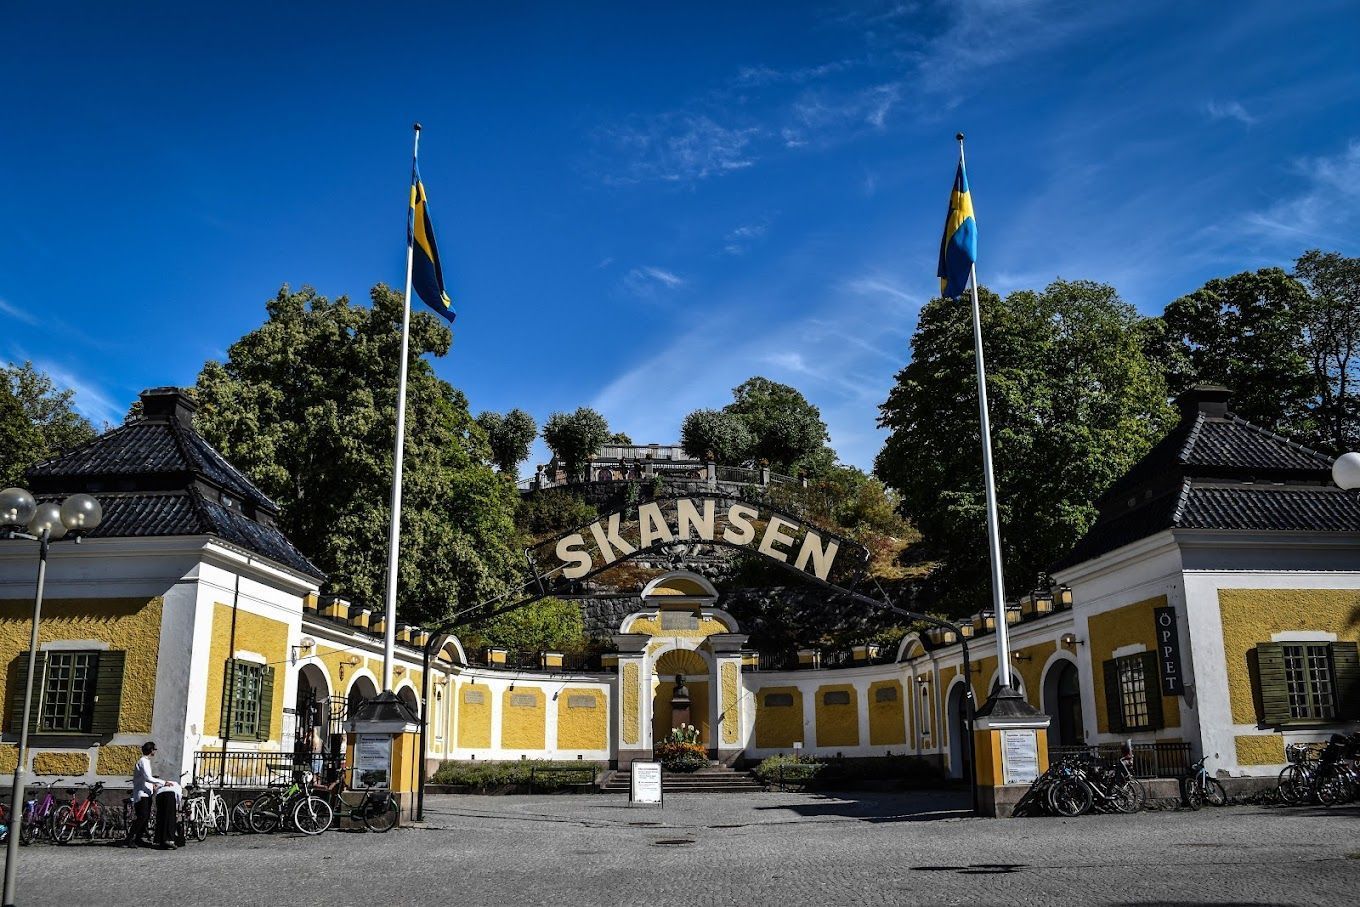 a yellow building with a sign that says ' skansen ' on it